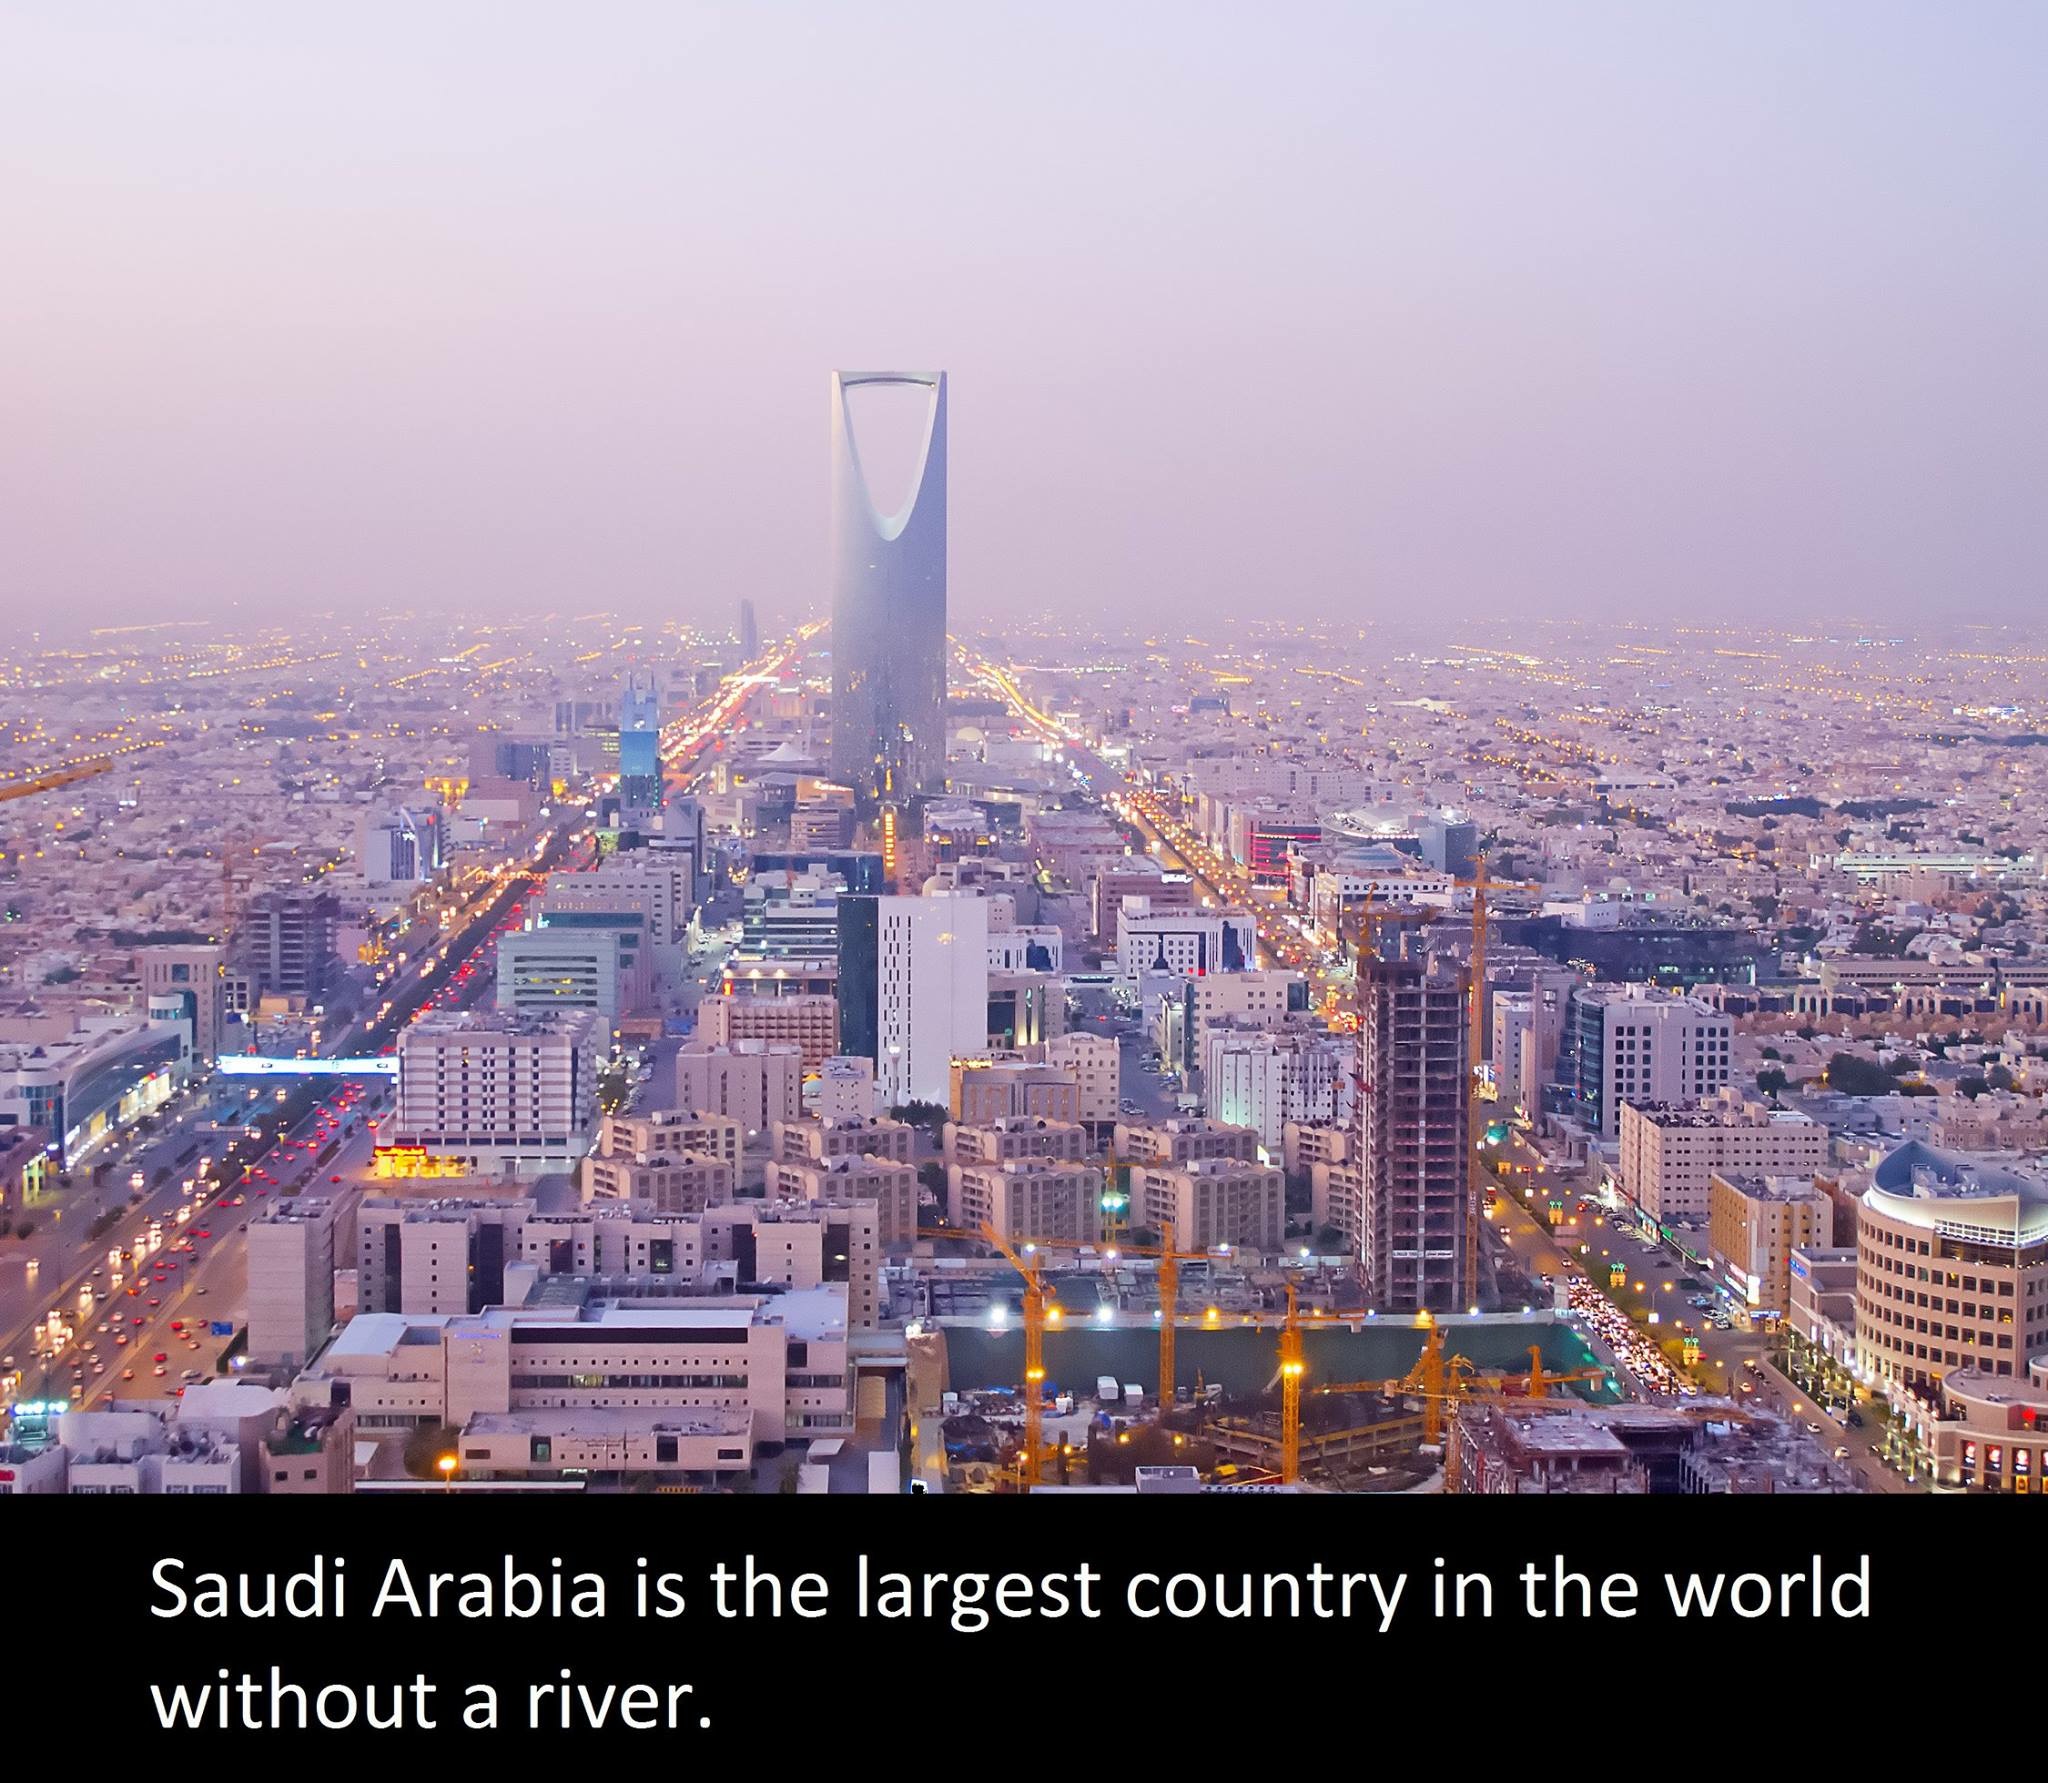 Saudi Arabia is the largest country in the world without a river.